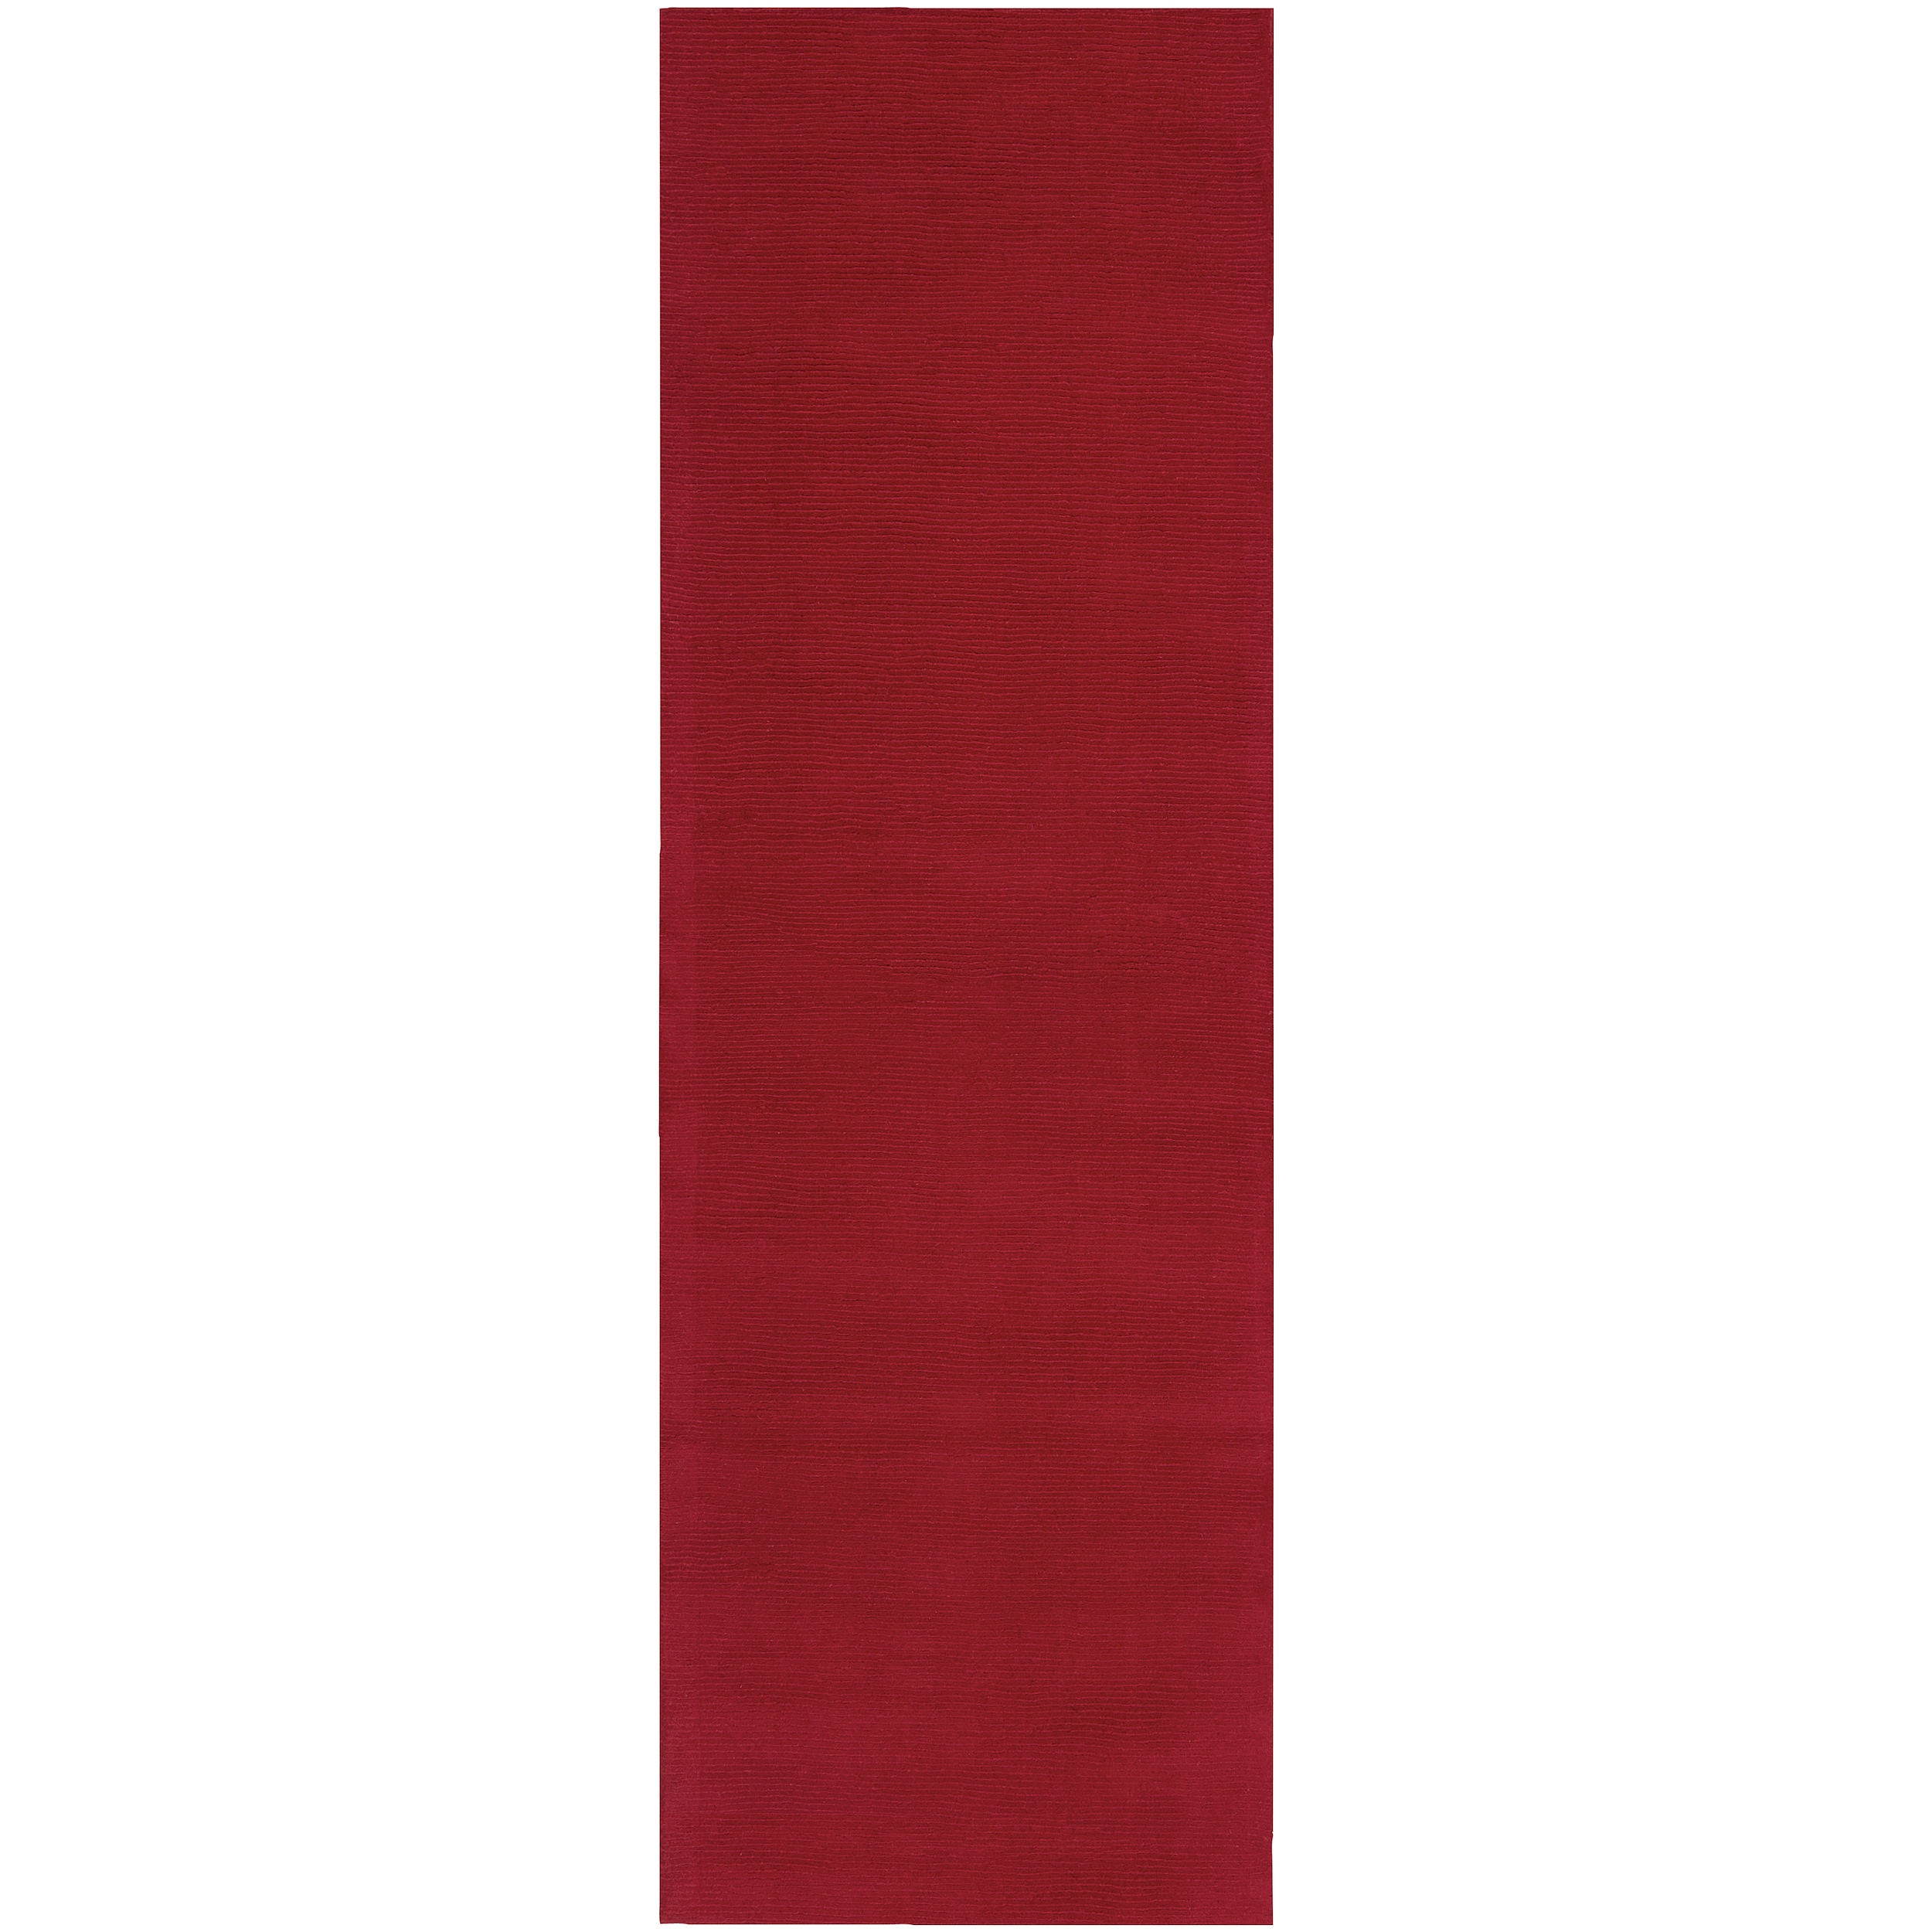 Hand crafted Red Solid Casual Vaga Wool Rug (26 X 8)